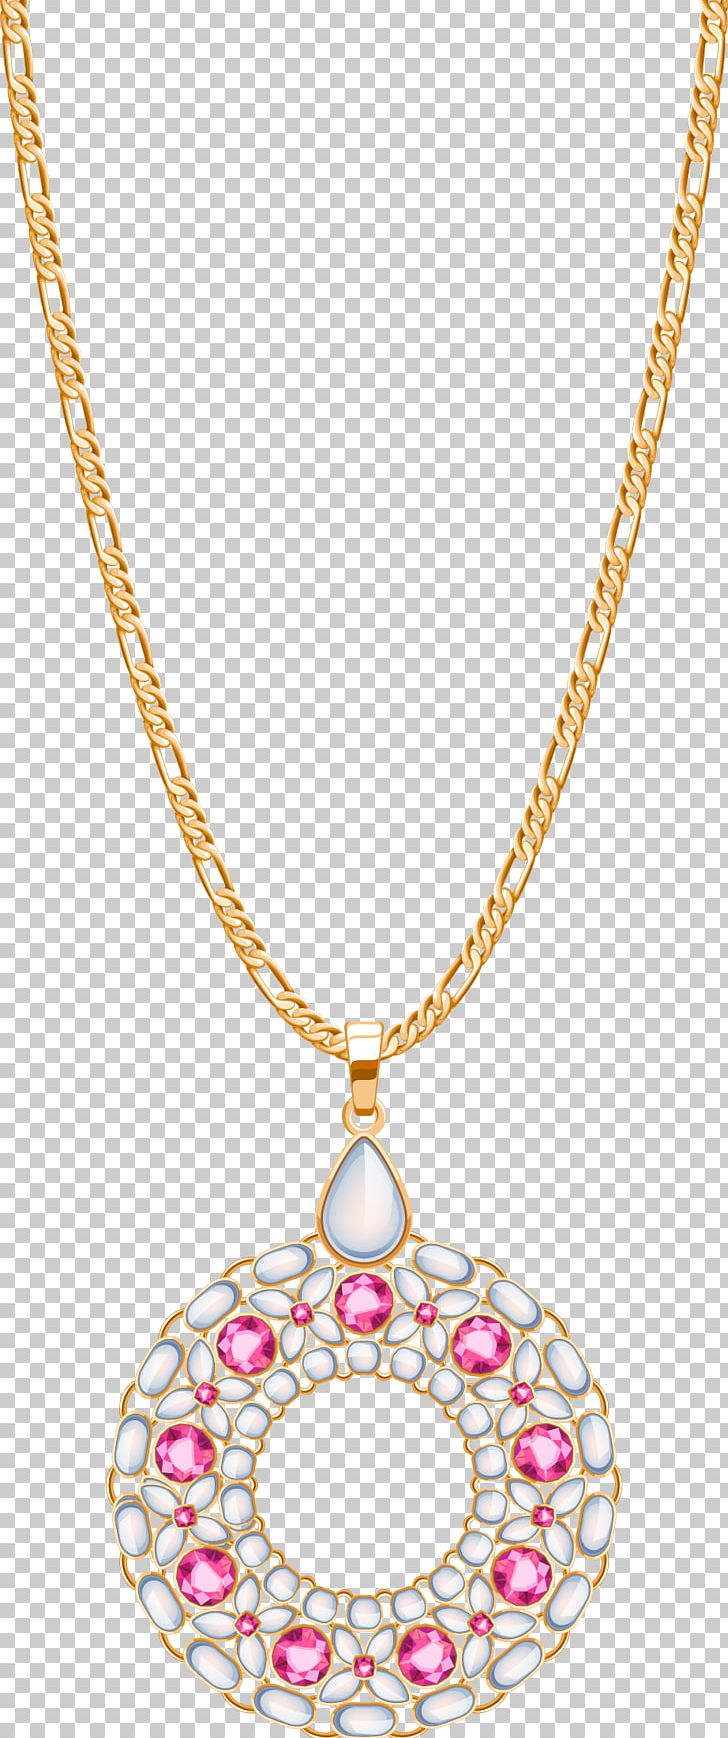 Locket Necklace Diamond Jewellery PNG, Clipart, Bitxi, Body Jewelry, Bright, Brilliant, Chain Free PNG Download